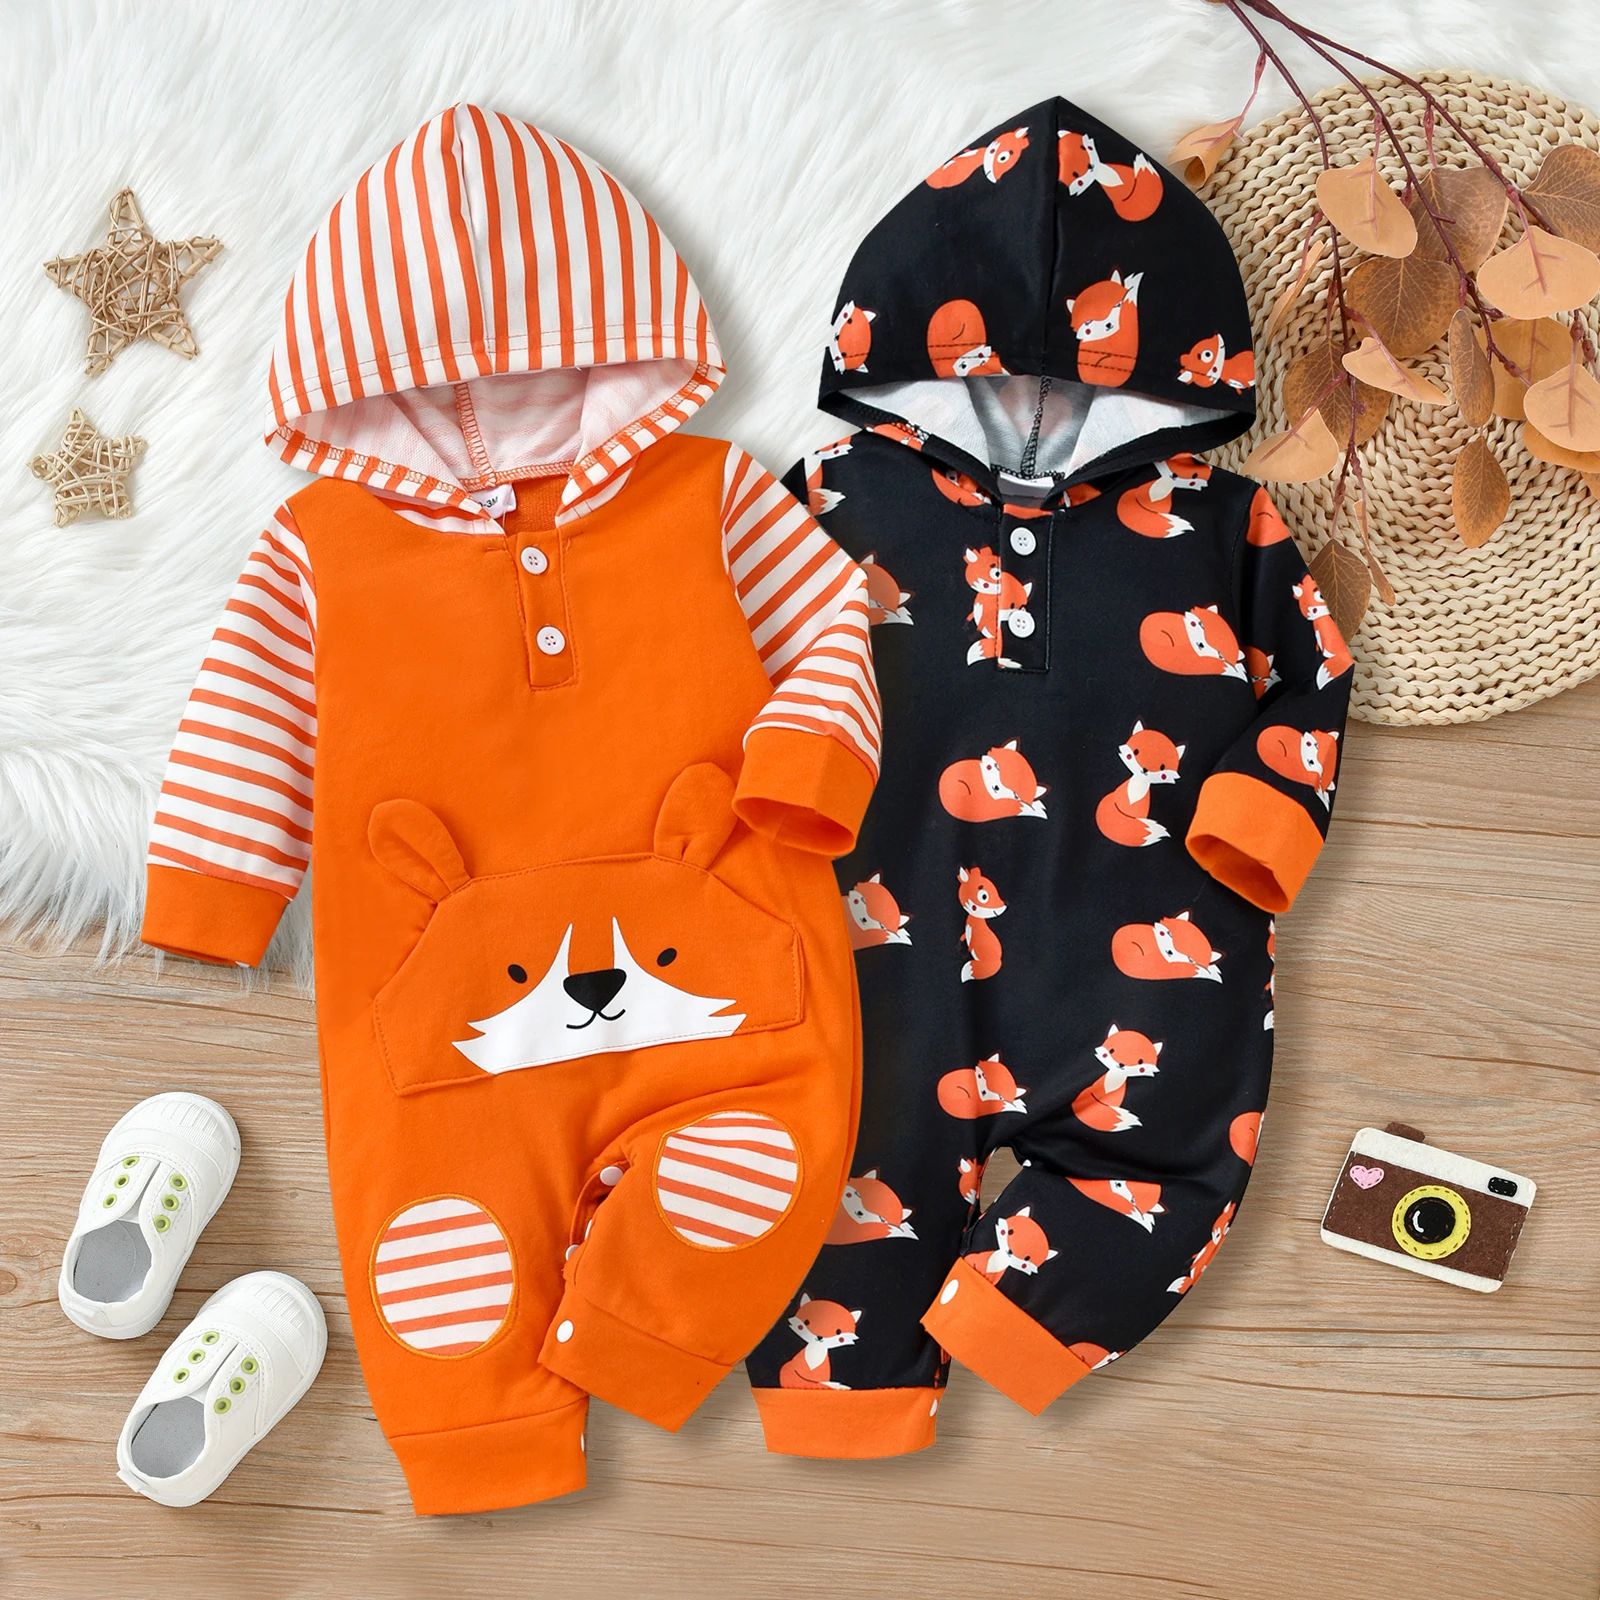 

pudcoco Baby Girls Boys Romper Autumn Toddlers Color Matching Cartoon Fox Printing/Stripe Long Sleeve Hooded Jumpsuit 0-18M